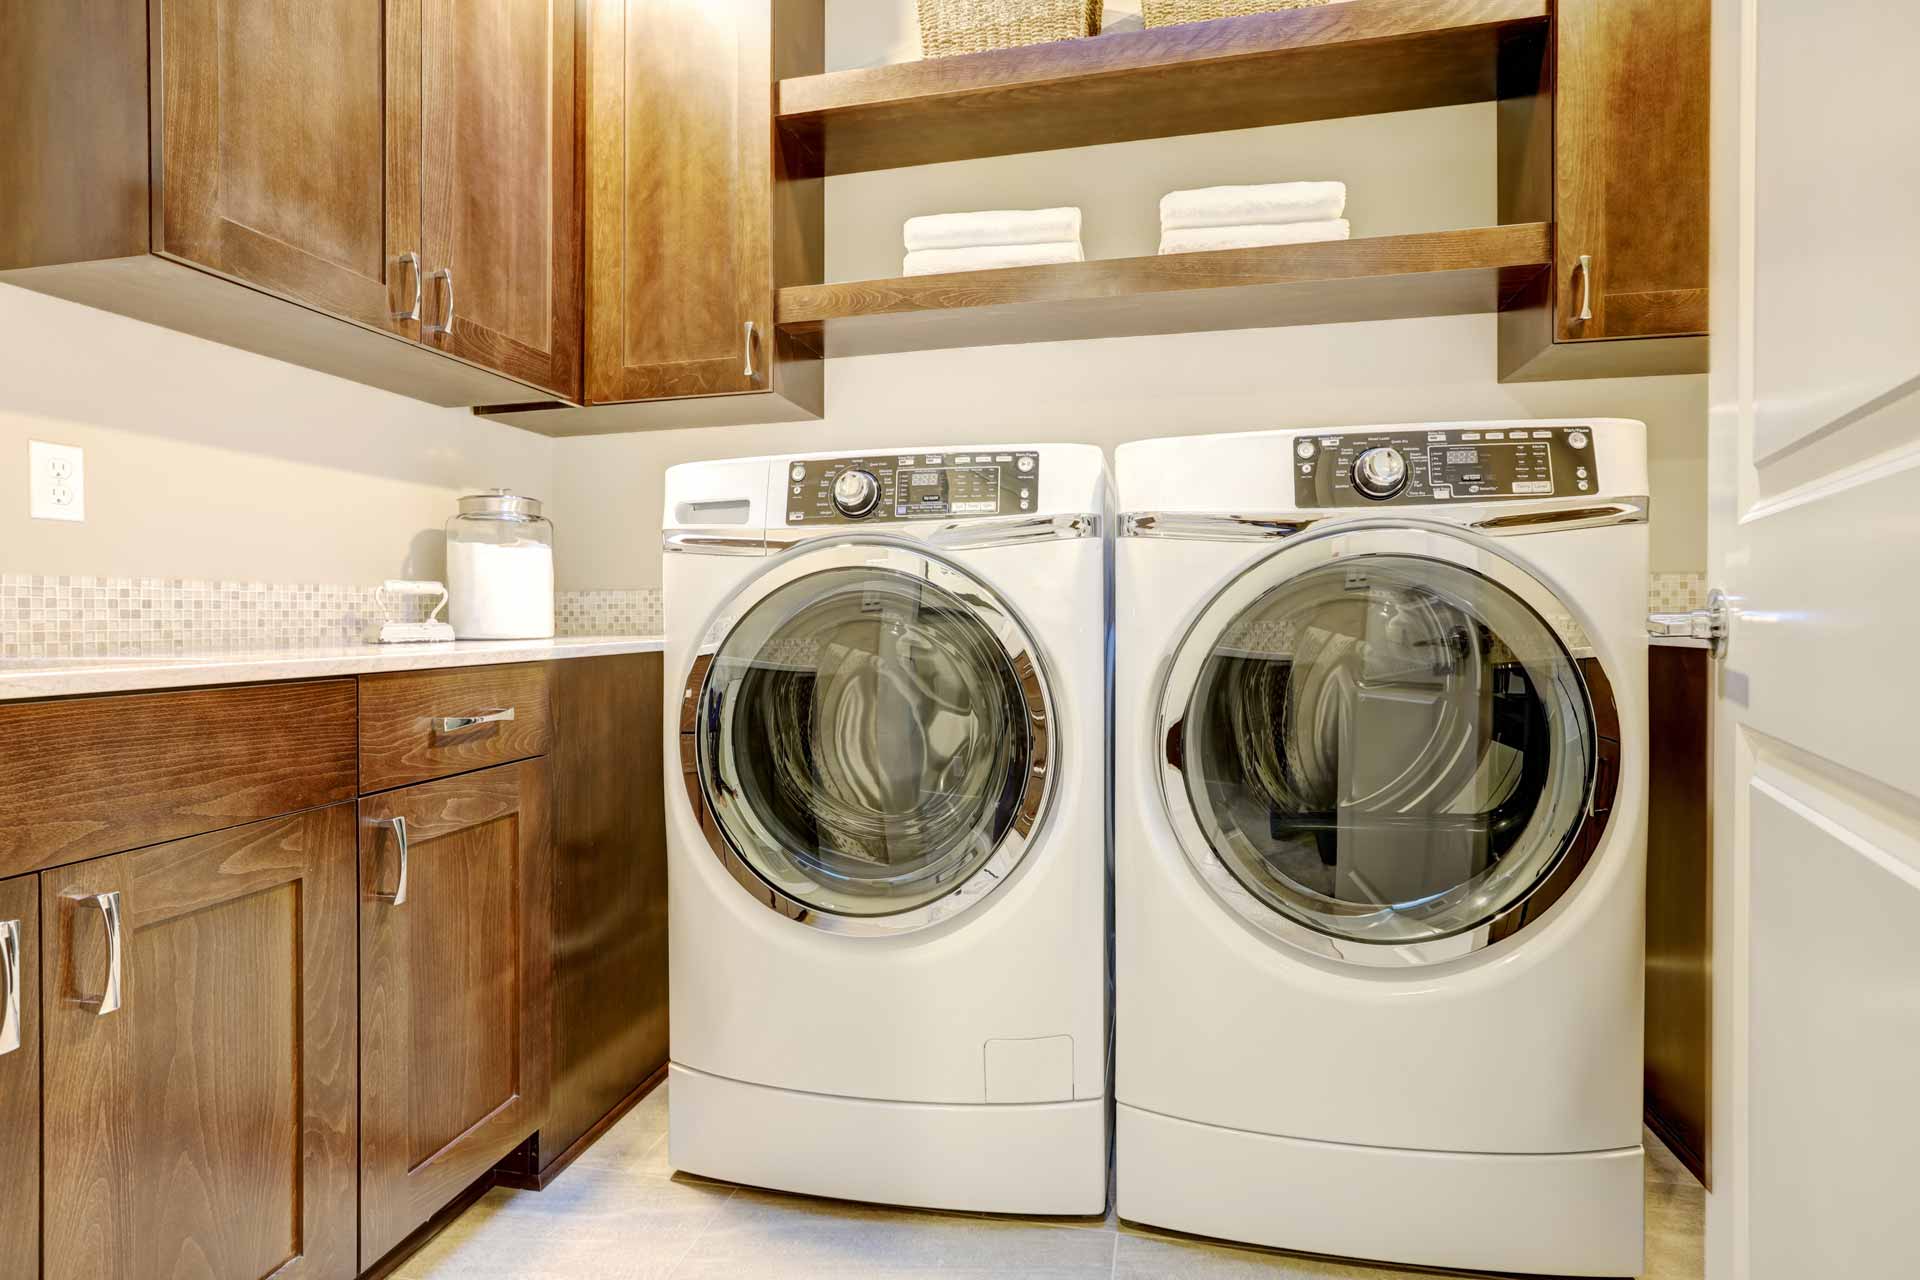 Side-by-side washer and dryer units